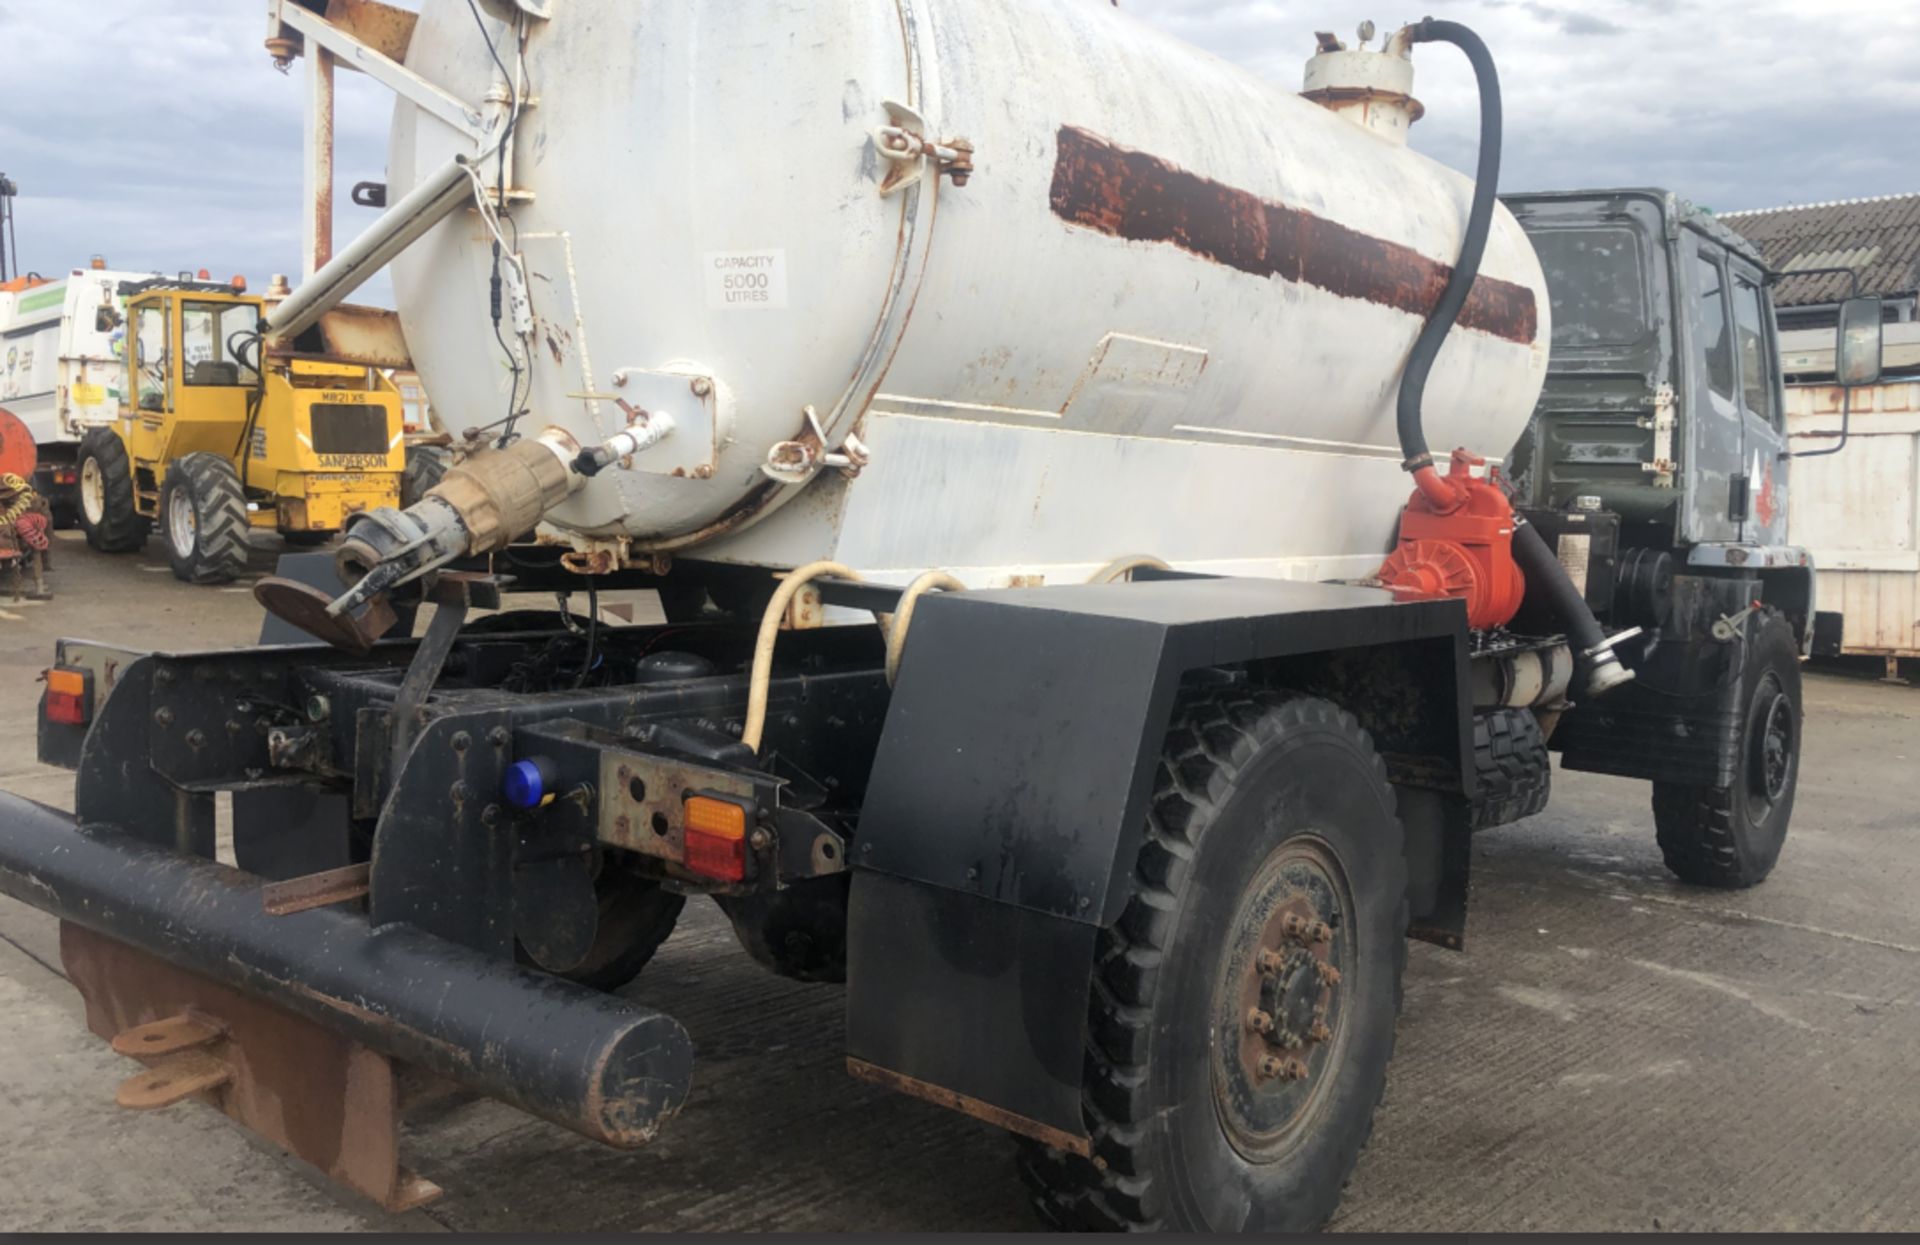 DAF T45 ,4×4 WATER BOWSER TRUCK - Image 7 of 10